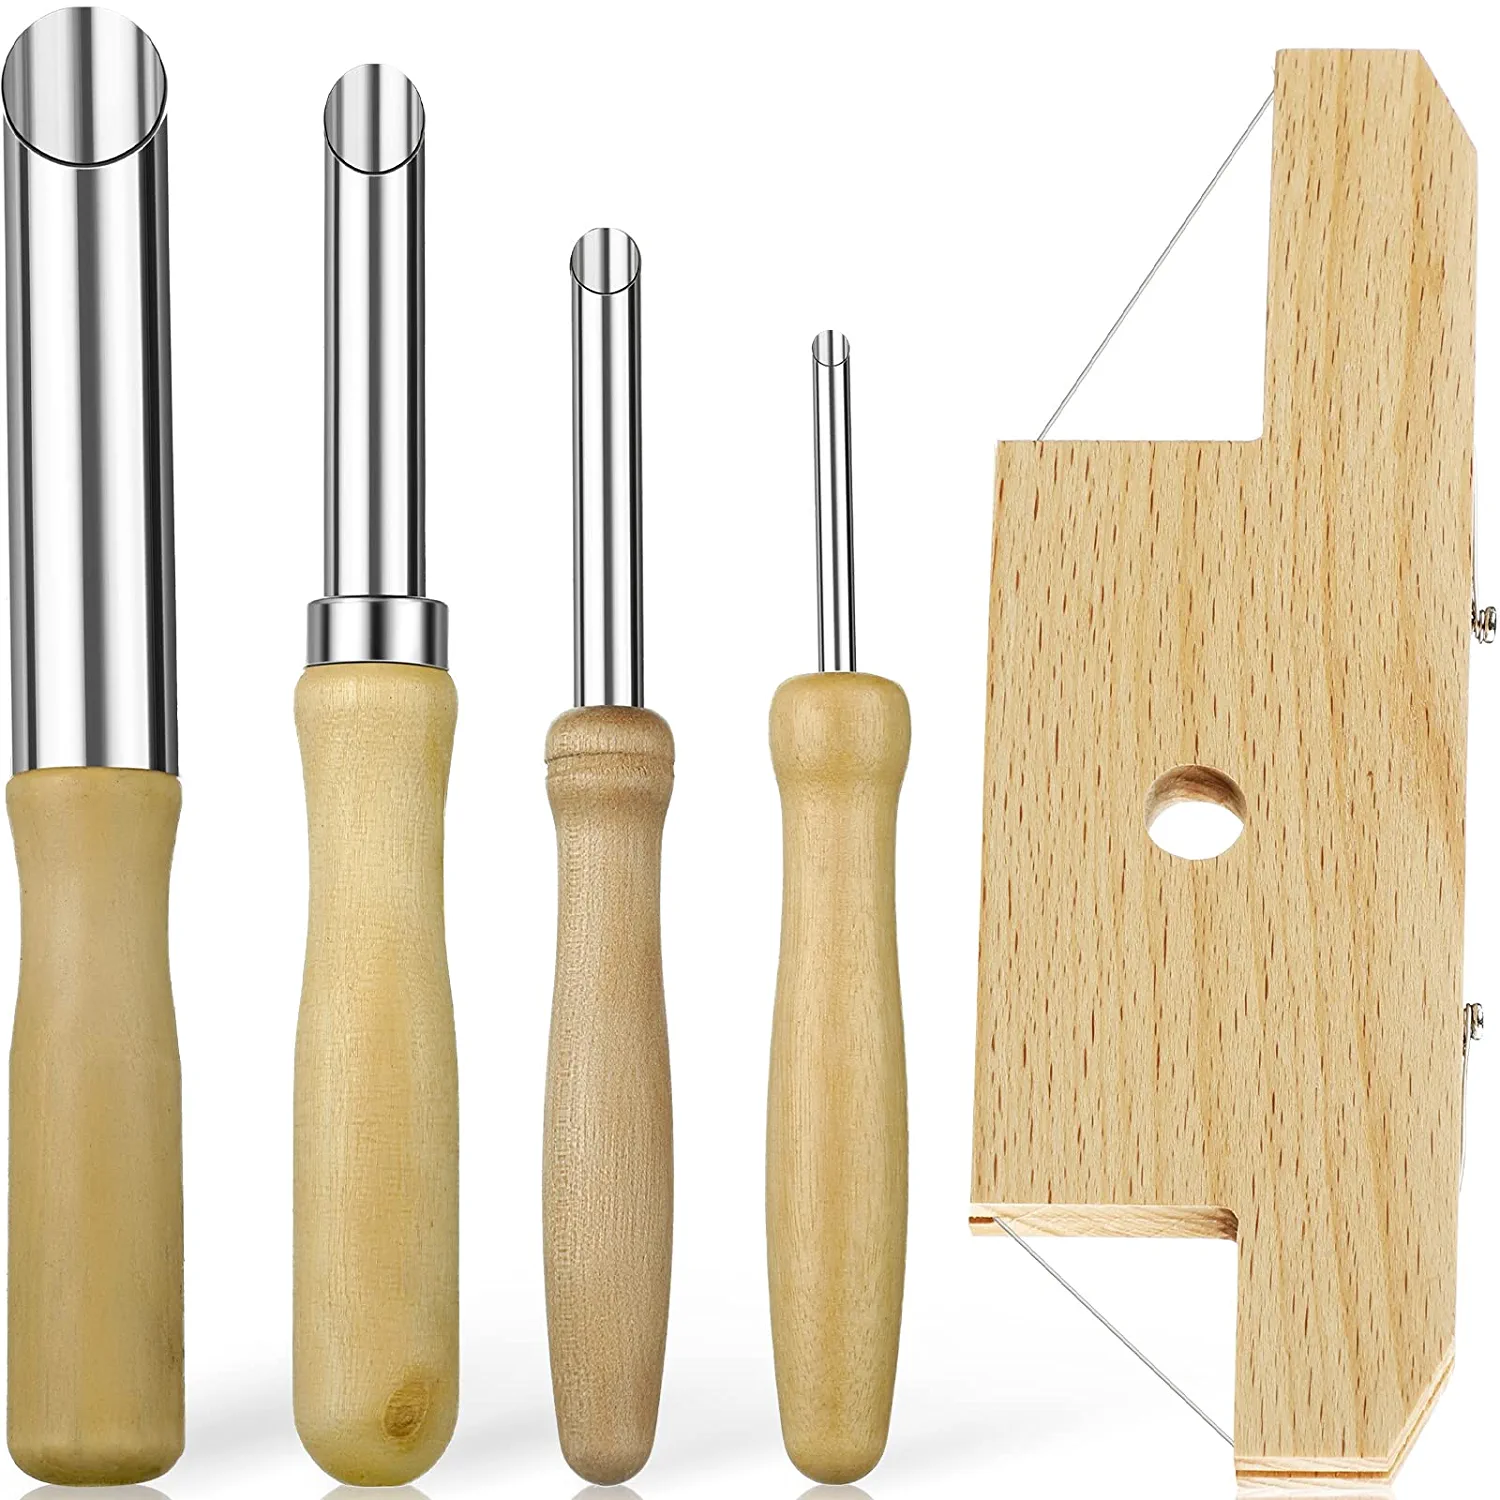 5 Pcs Pottery Clay Tools Set Includes Wood And Wire Bevel Cutter And 4 Pcs Circu - £15.68 GBP